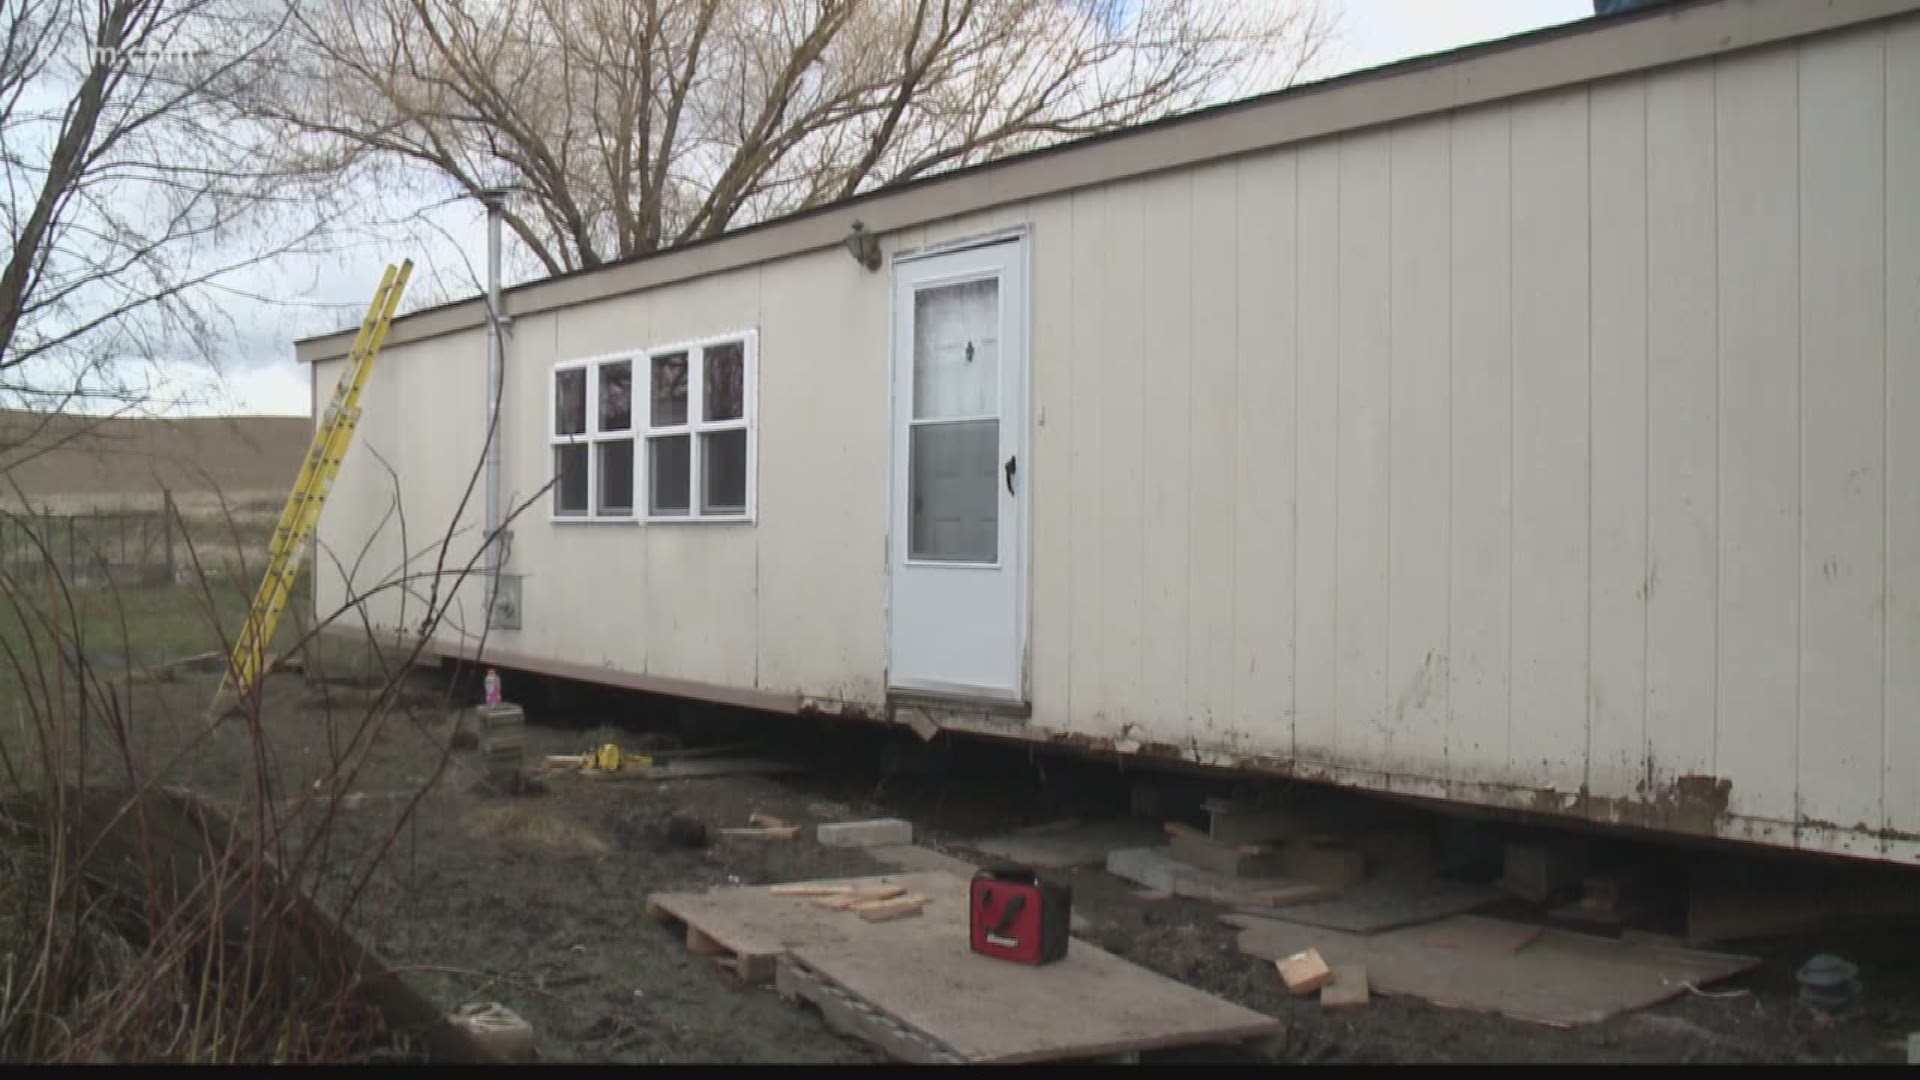 KREM 2's Taylor Viydo has more on the park and the people stepping up to help its residents move.